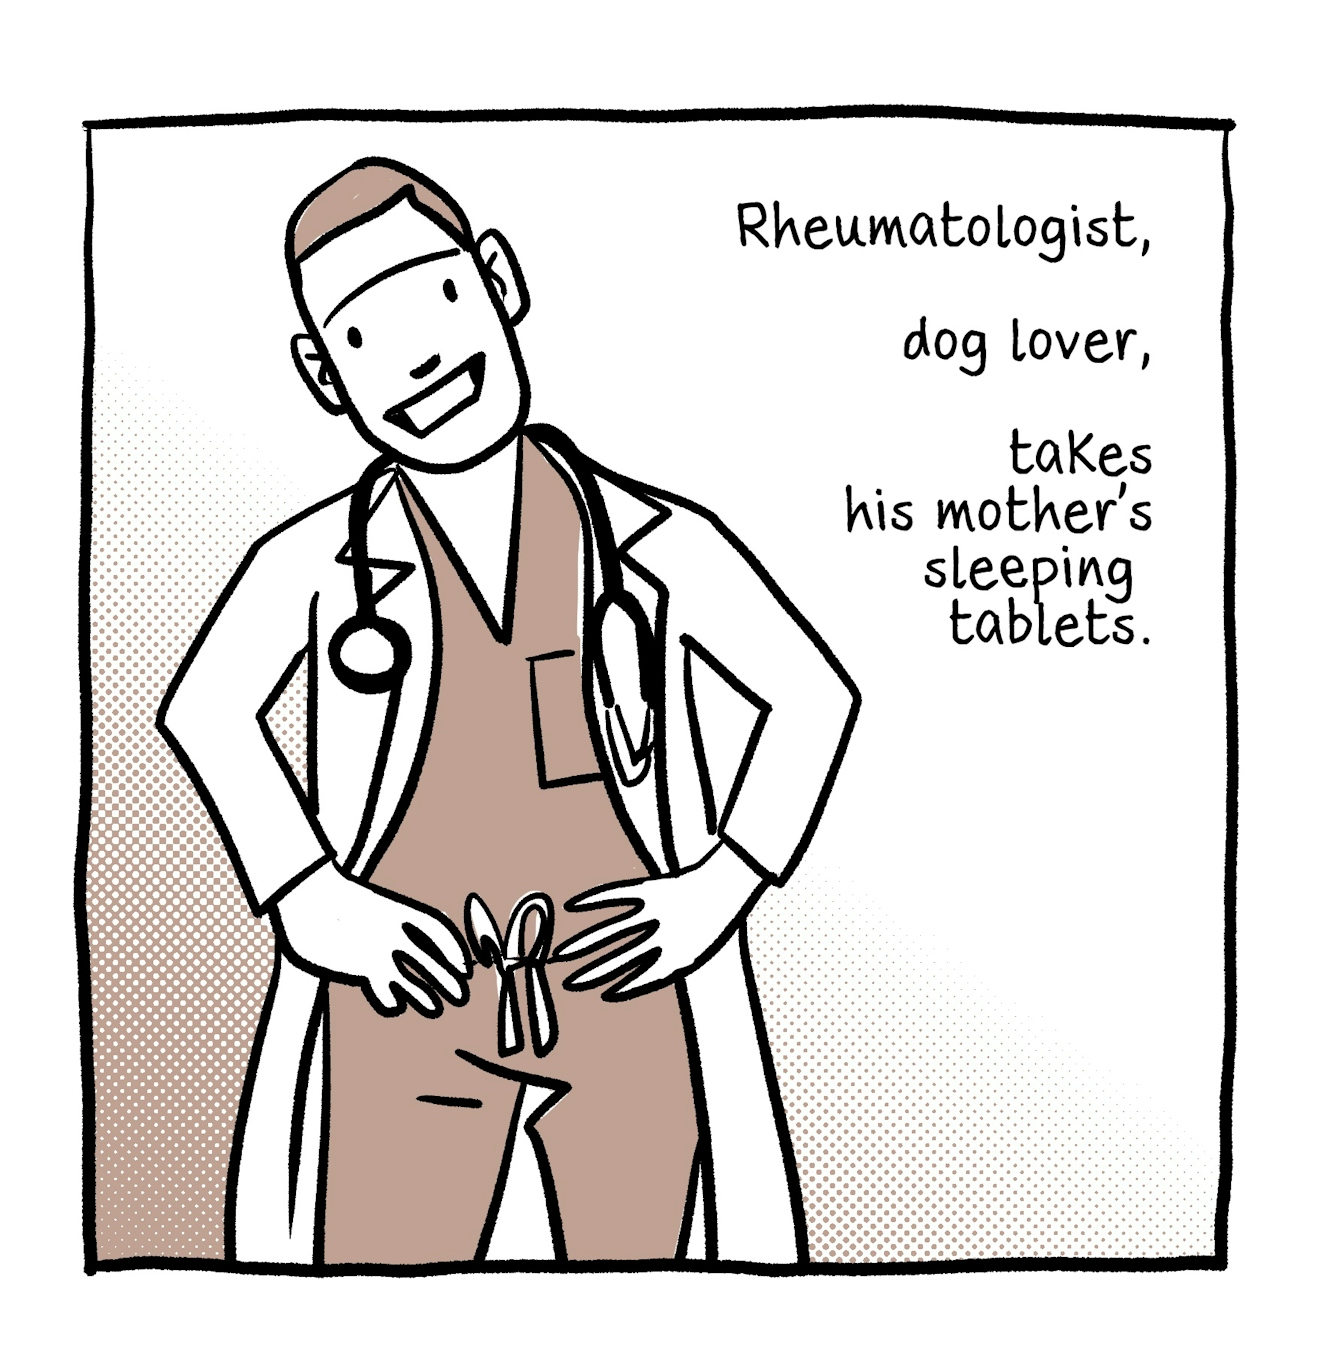 The third panel shows a young male doctor standing with his hands on his hips with a white lab coat over his scrubs, stethoscope draped around his neck. He is smiling widely look at the viewer. The text next to him reads, "Rheumatologist.. dog lover... takes his mother's sleeping tablets."